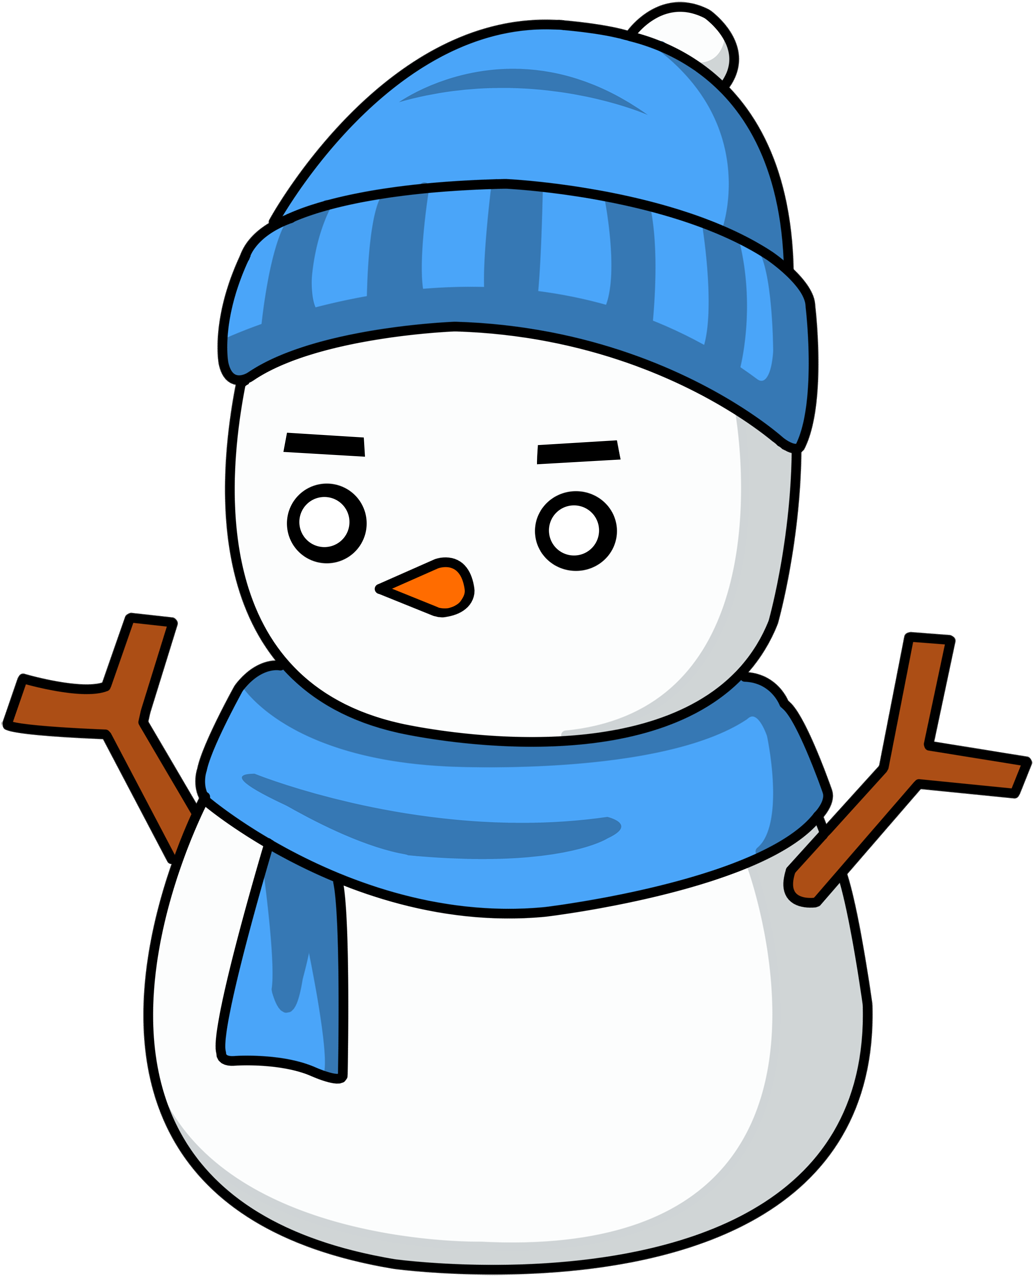 Snowman With Blue Hat (1200x1600)